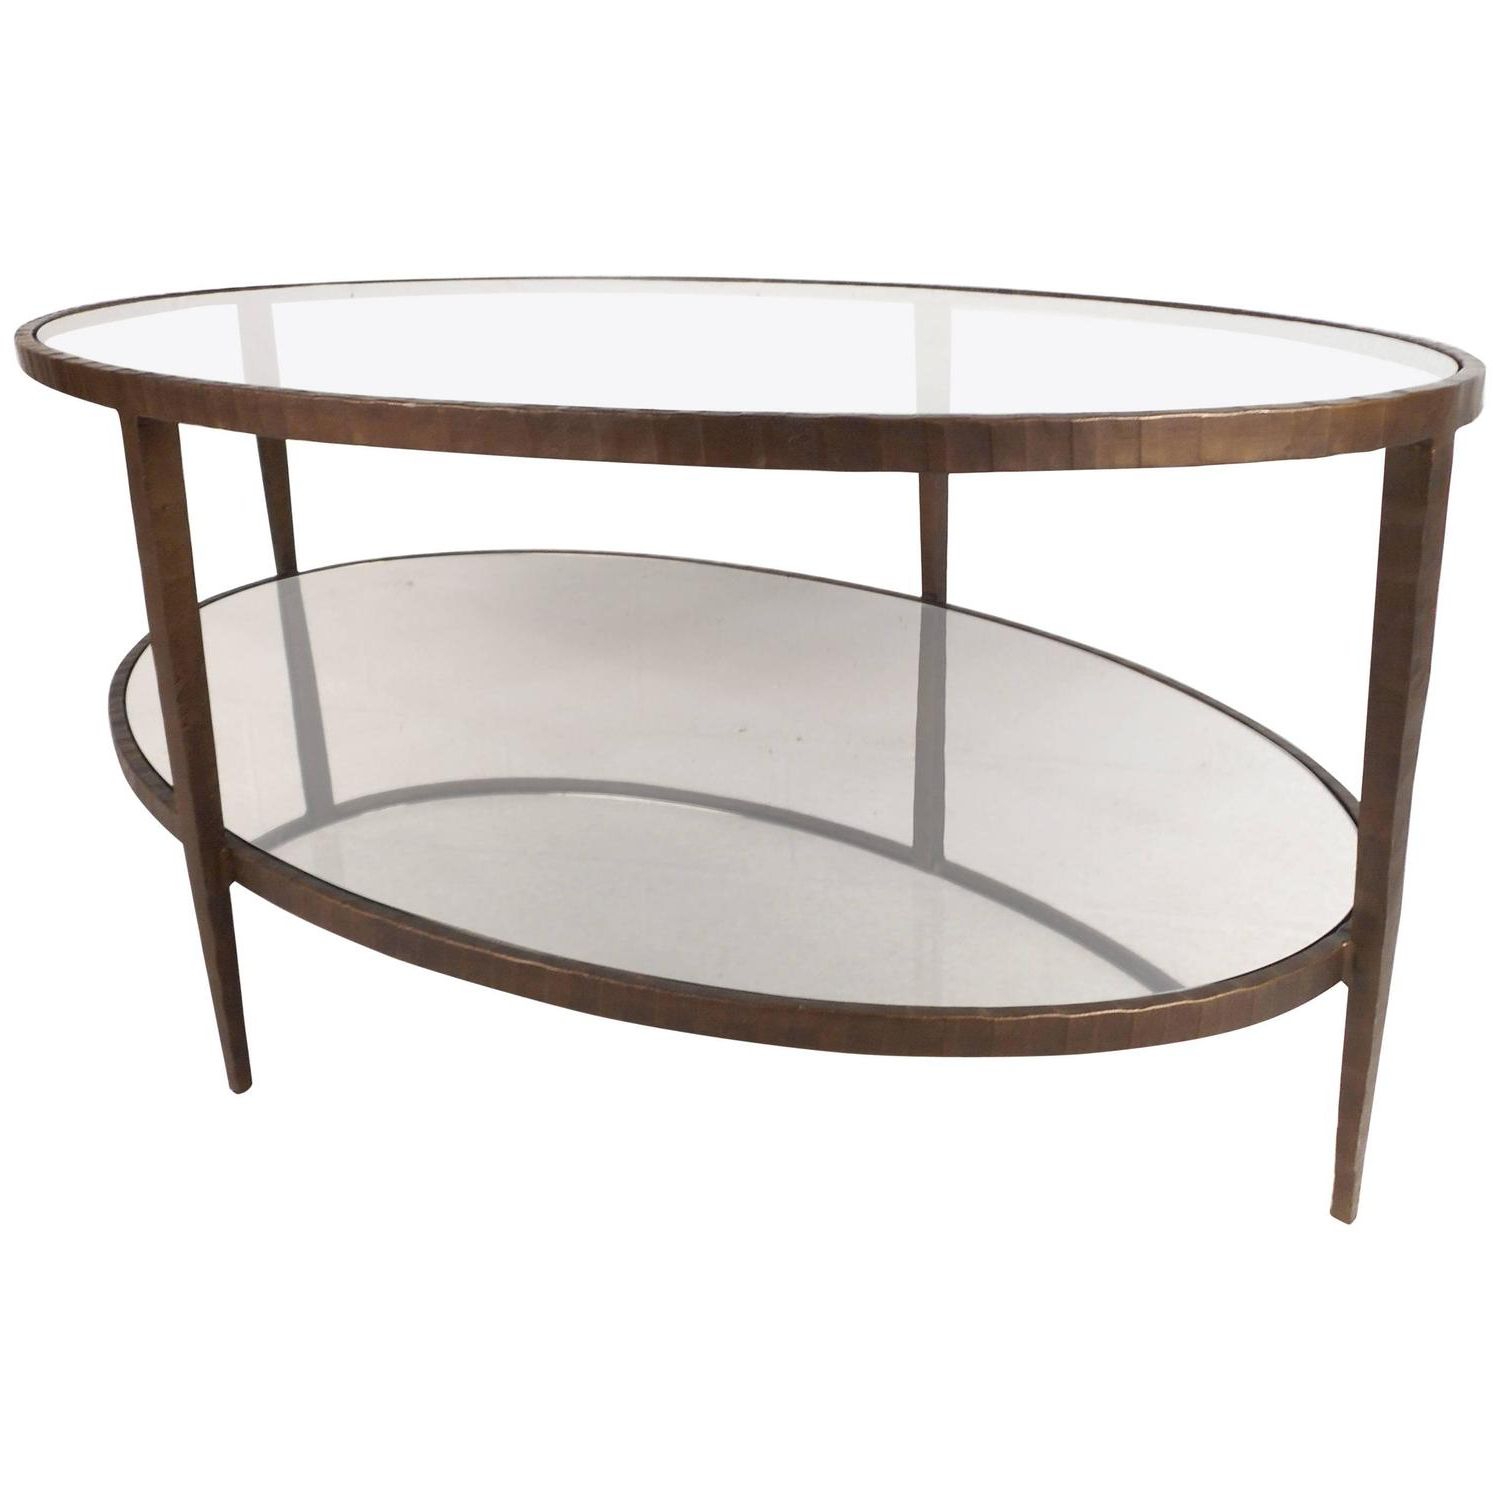 Well Liked Metallic Gold Modern Cocktail Tables In Mid Century Modern Oval Two Tier Textured Metal Coffee (View 12 of 20)